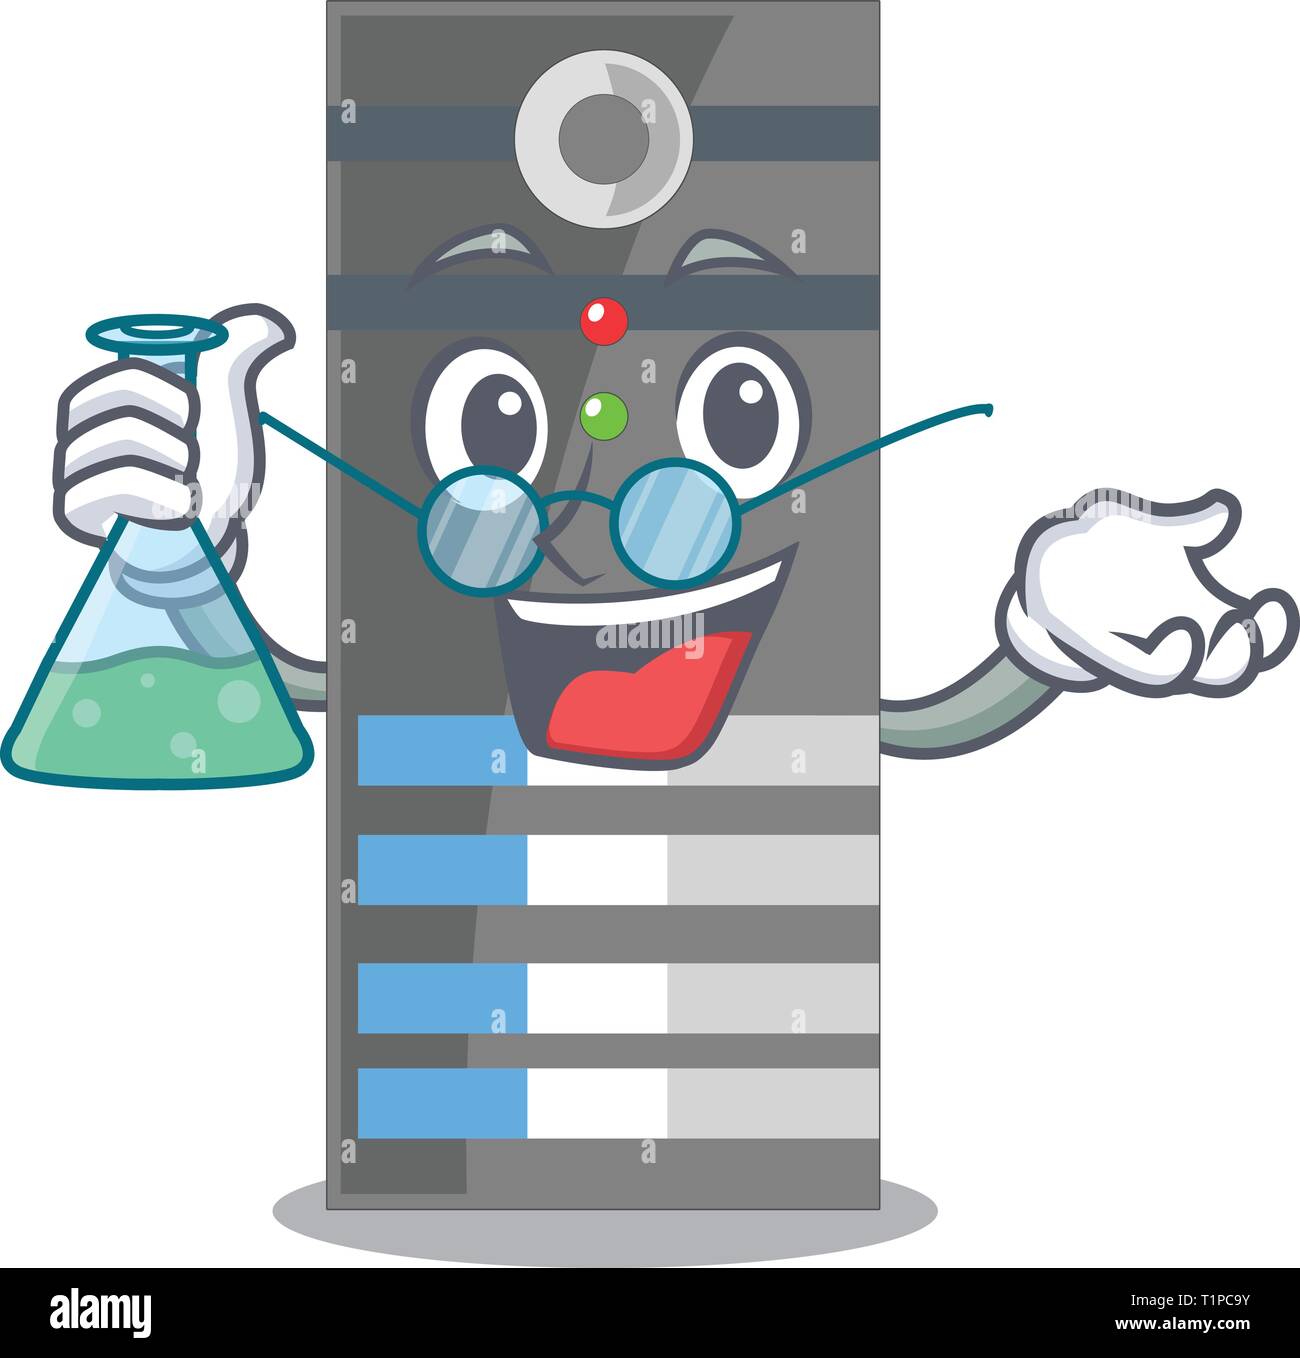 Professor data server isolated in the character vector illustration Stock Vector